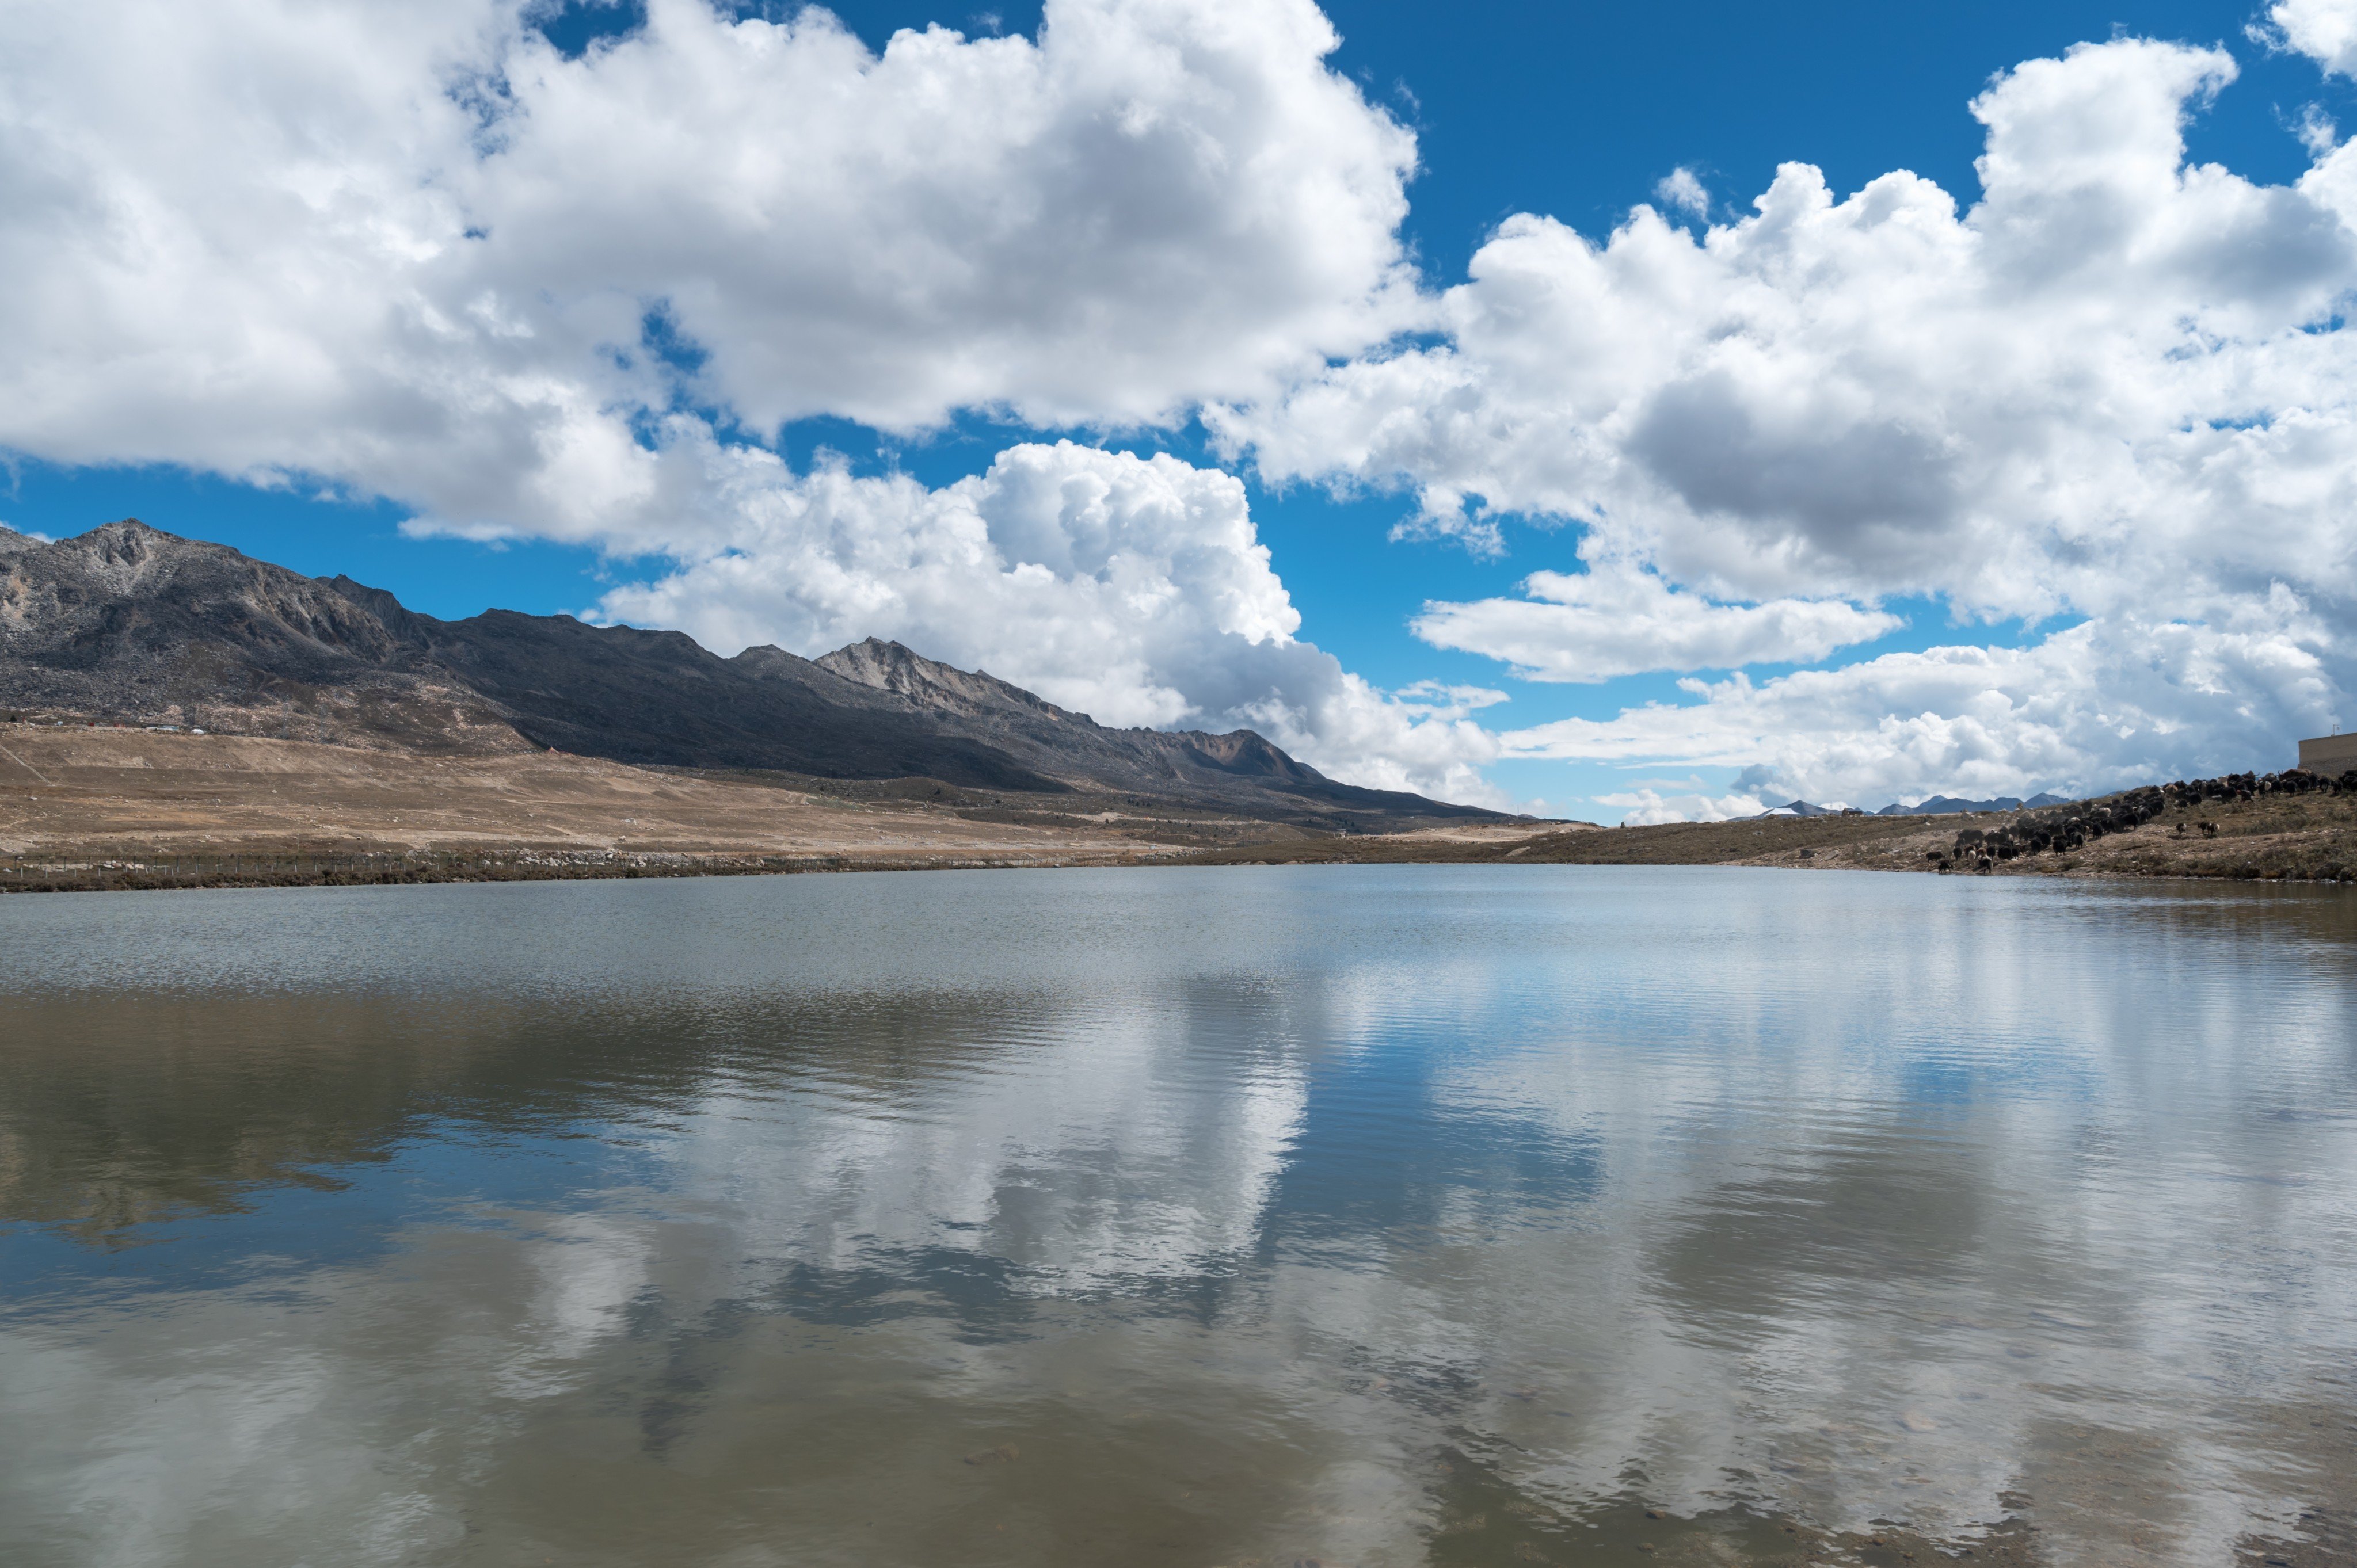 Lakes in the Qinghai-Tibet Plateau are set to increase massively in water volume and surface area as a result of climate change according to a new study. Photo: Shutterstock